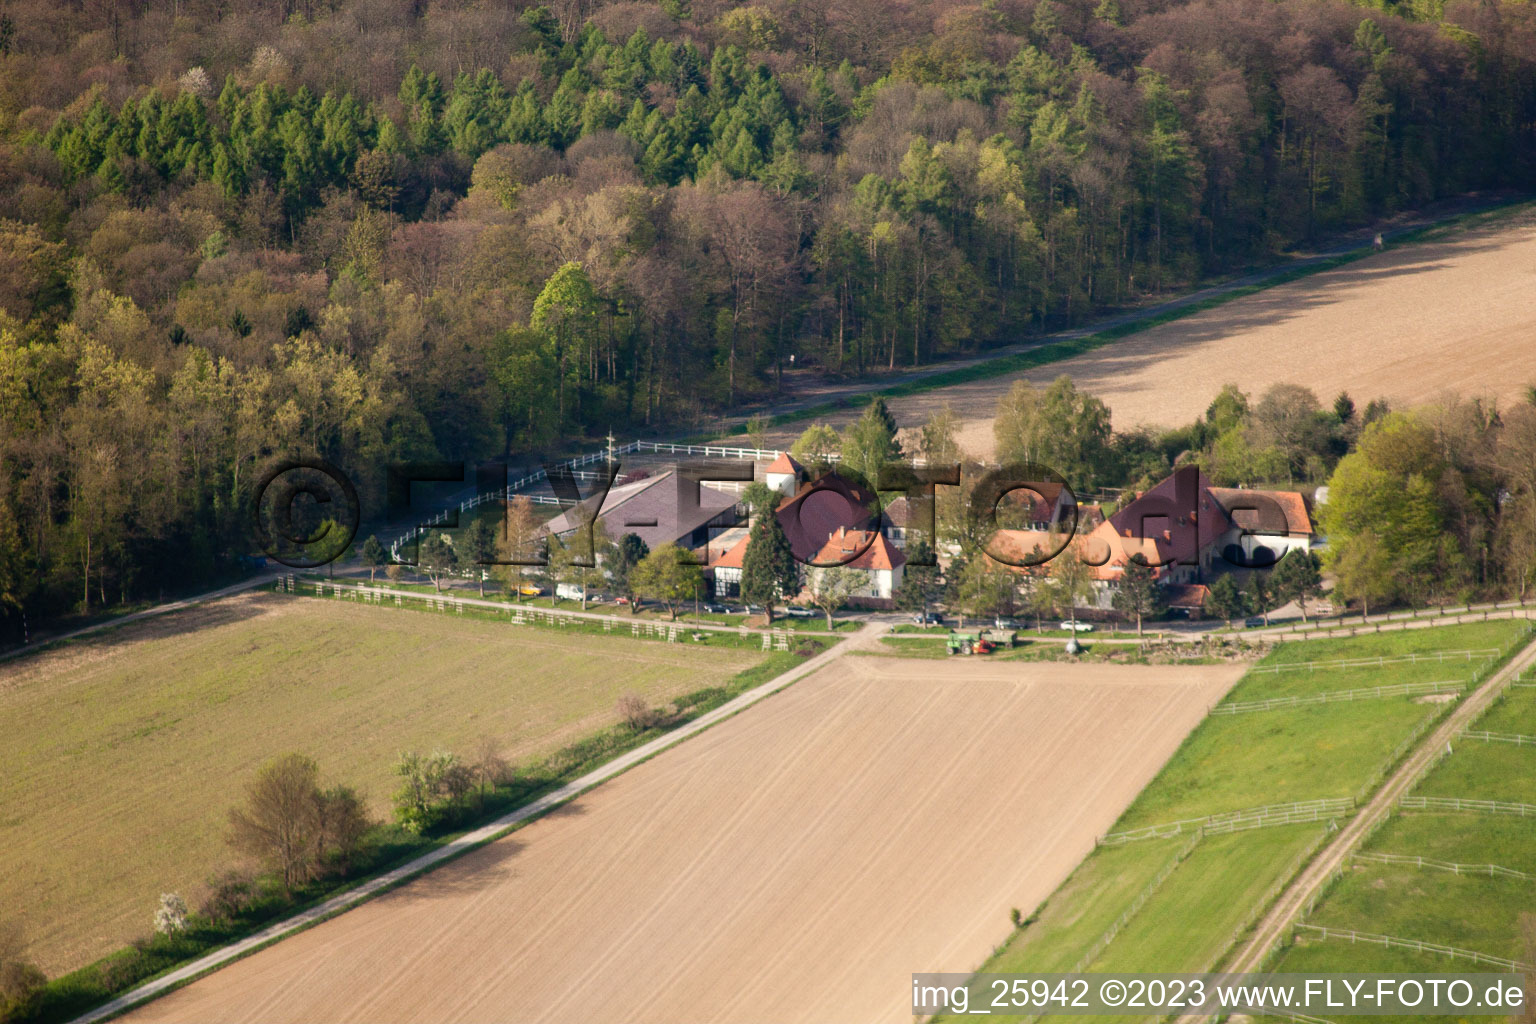 Rittnerthof in the district Durlach in Karlsruhe in the state Baden-Wuerttemberg, Germany from the drone perspective